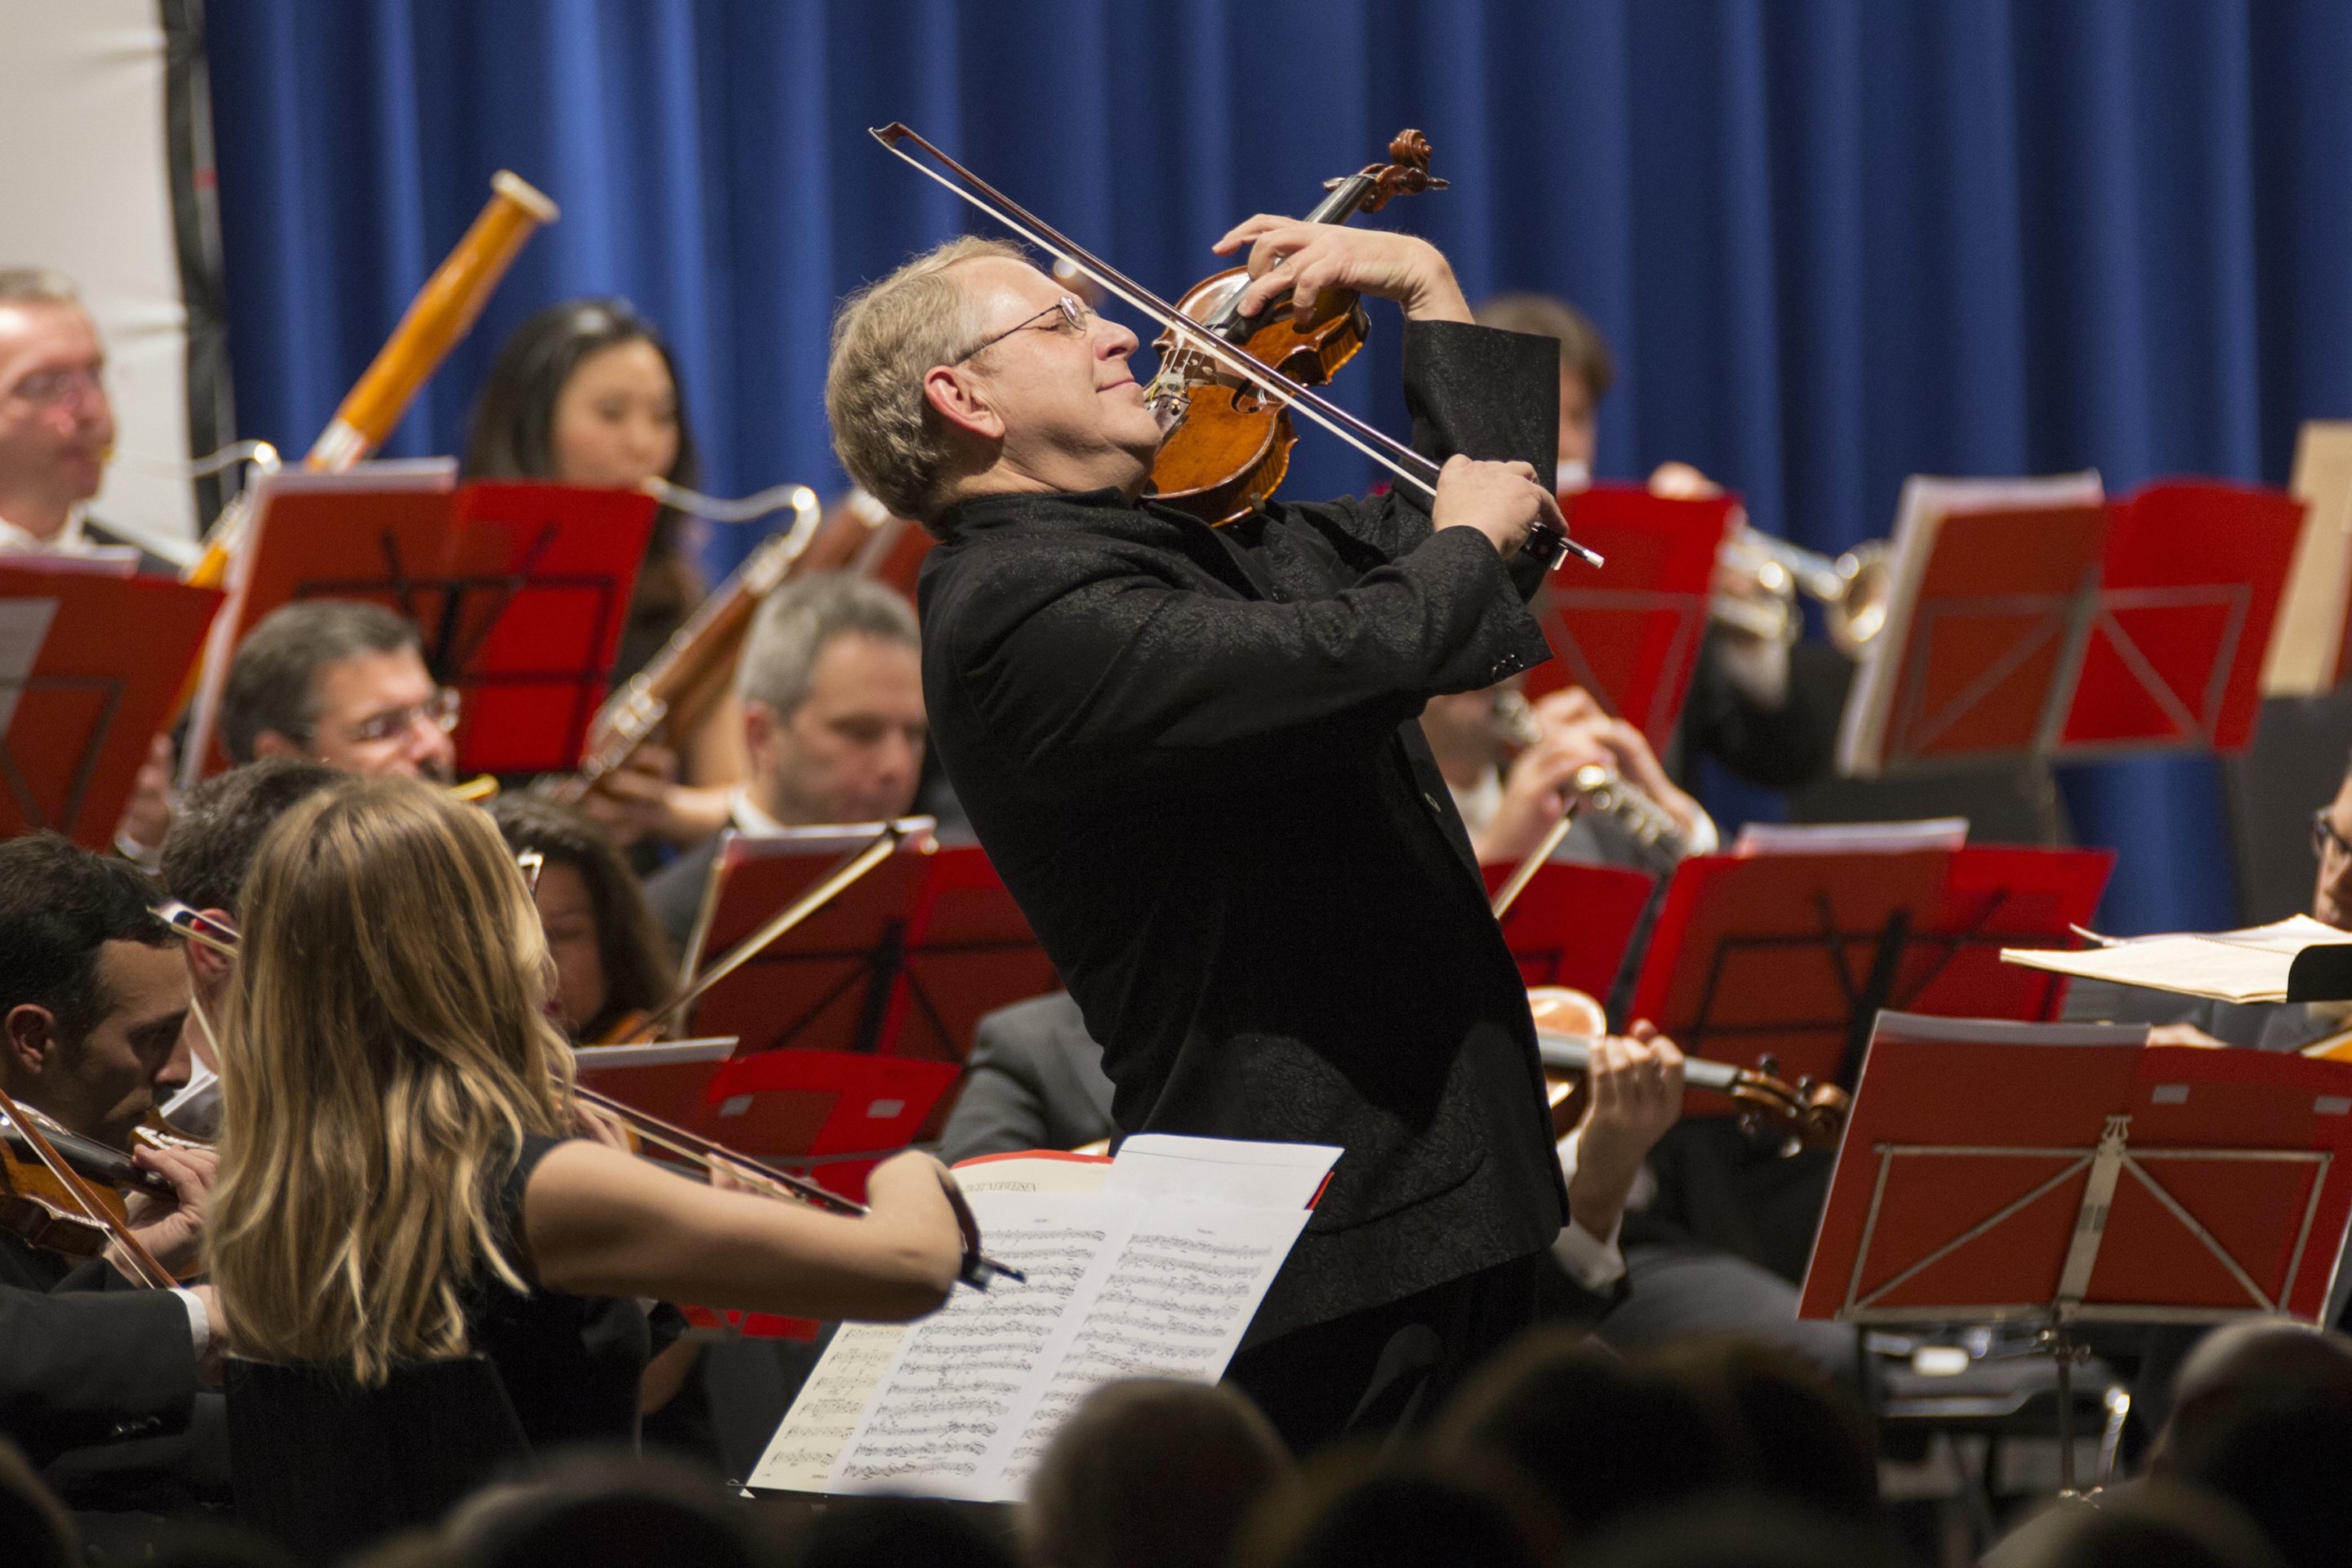 a man playing violin in an orchestra